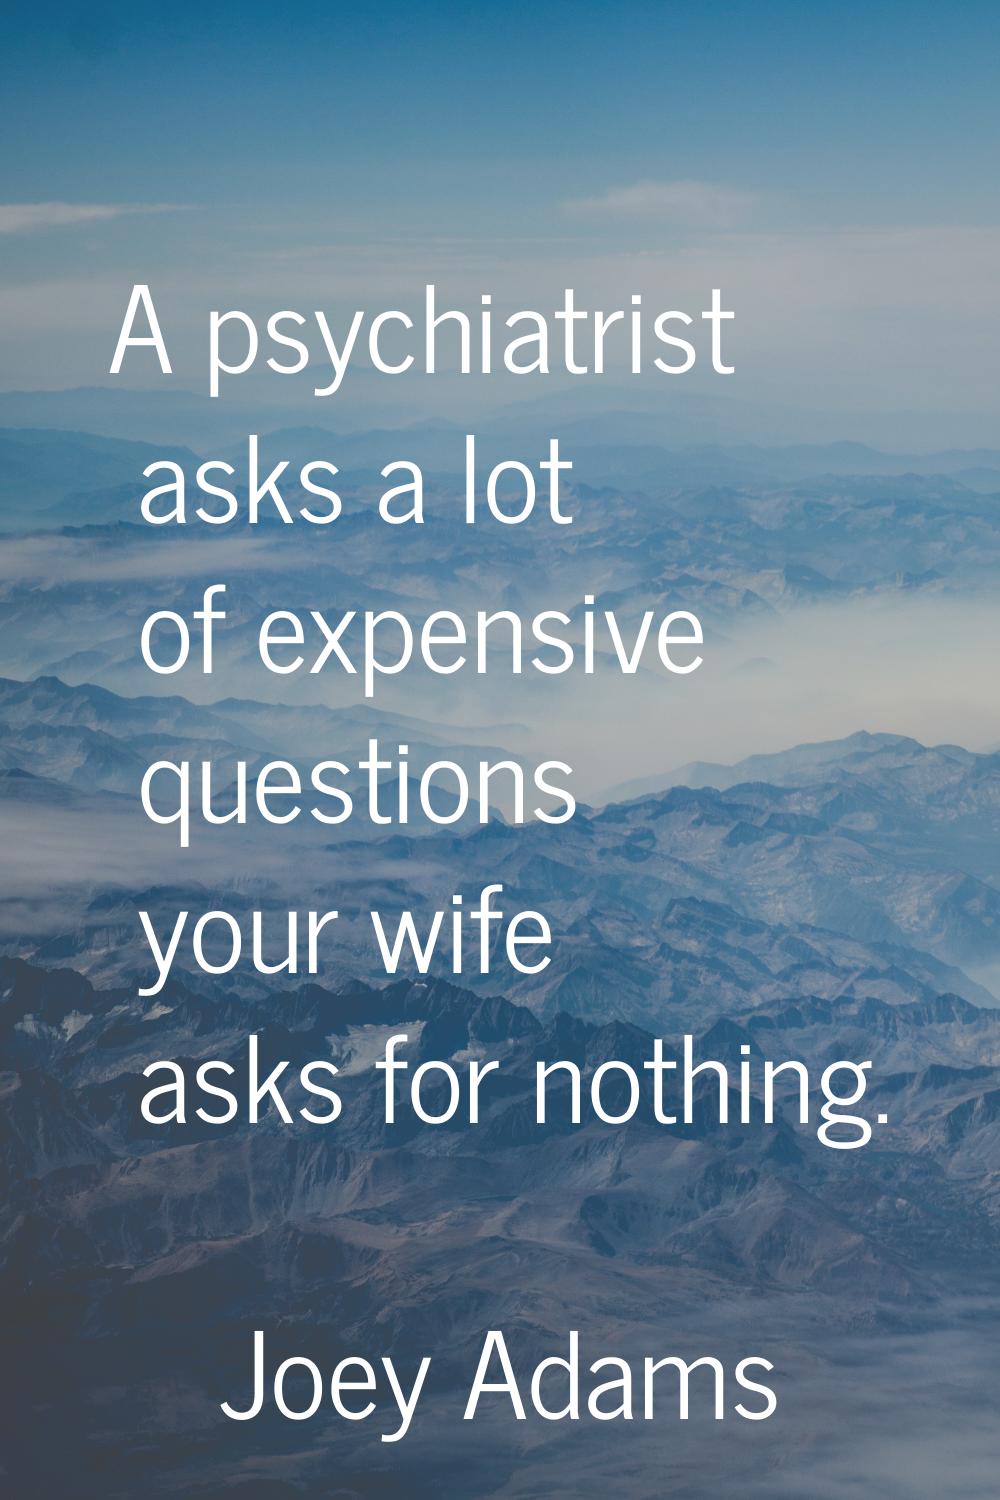 A psychiatrist asks a lot of expensive questions your wife asks for nothing.